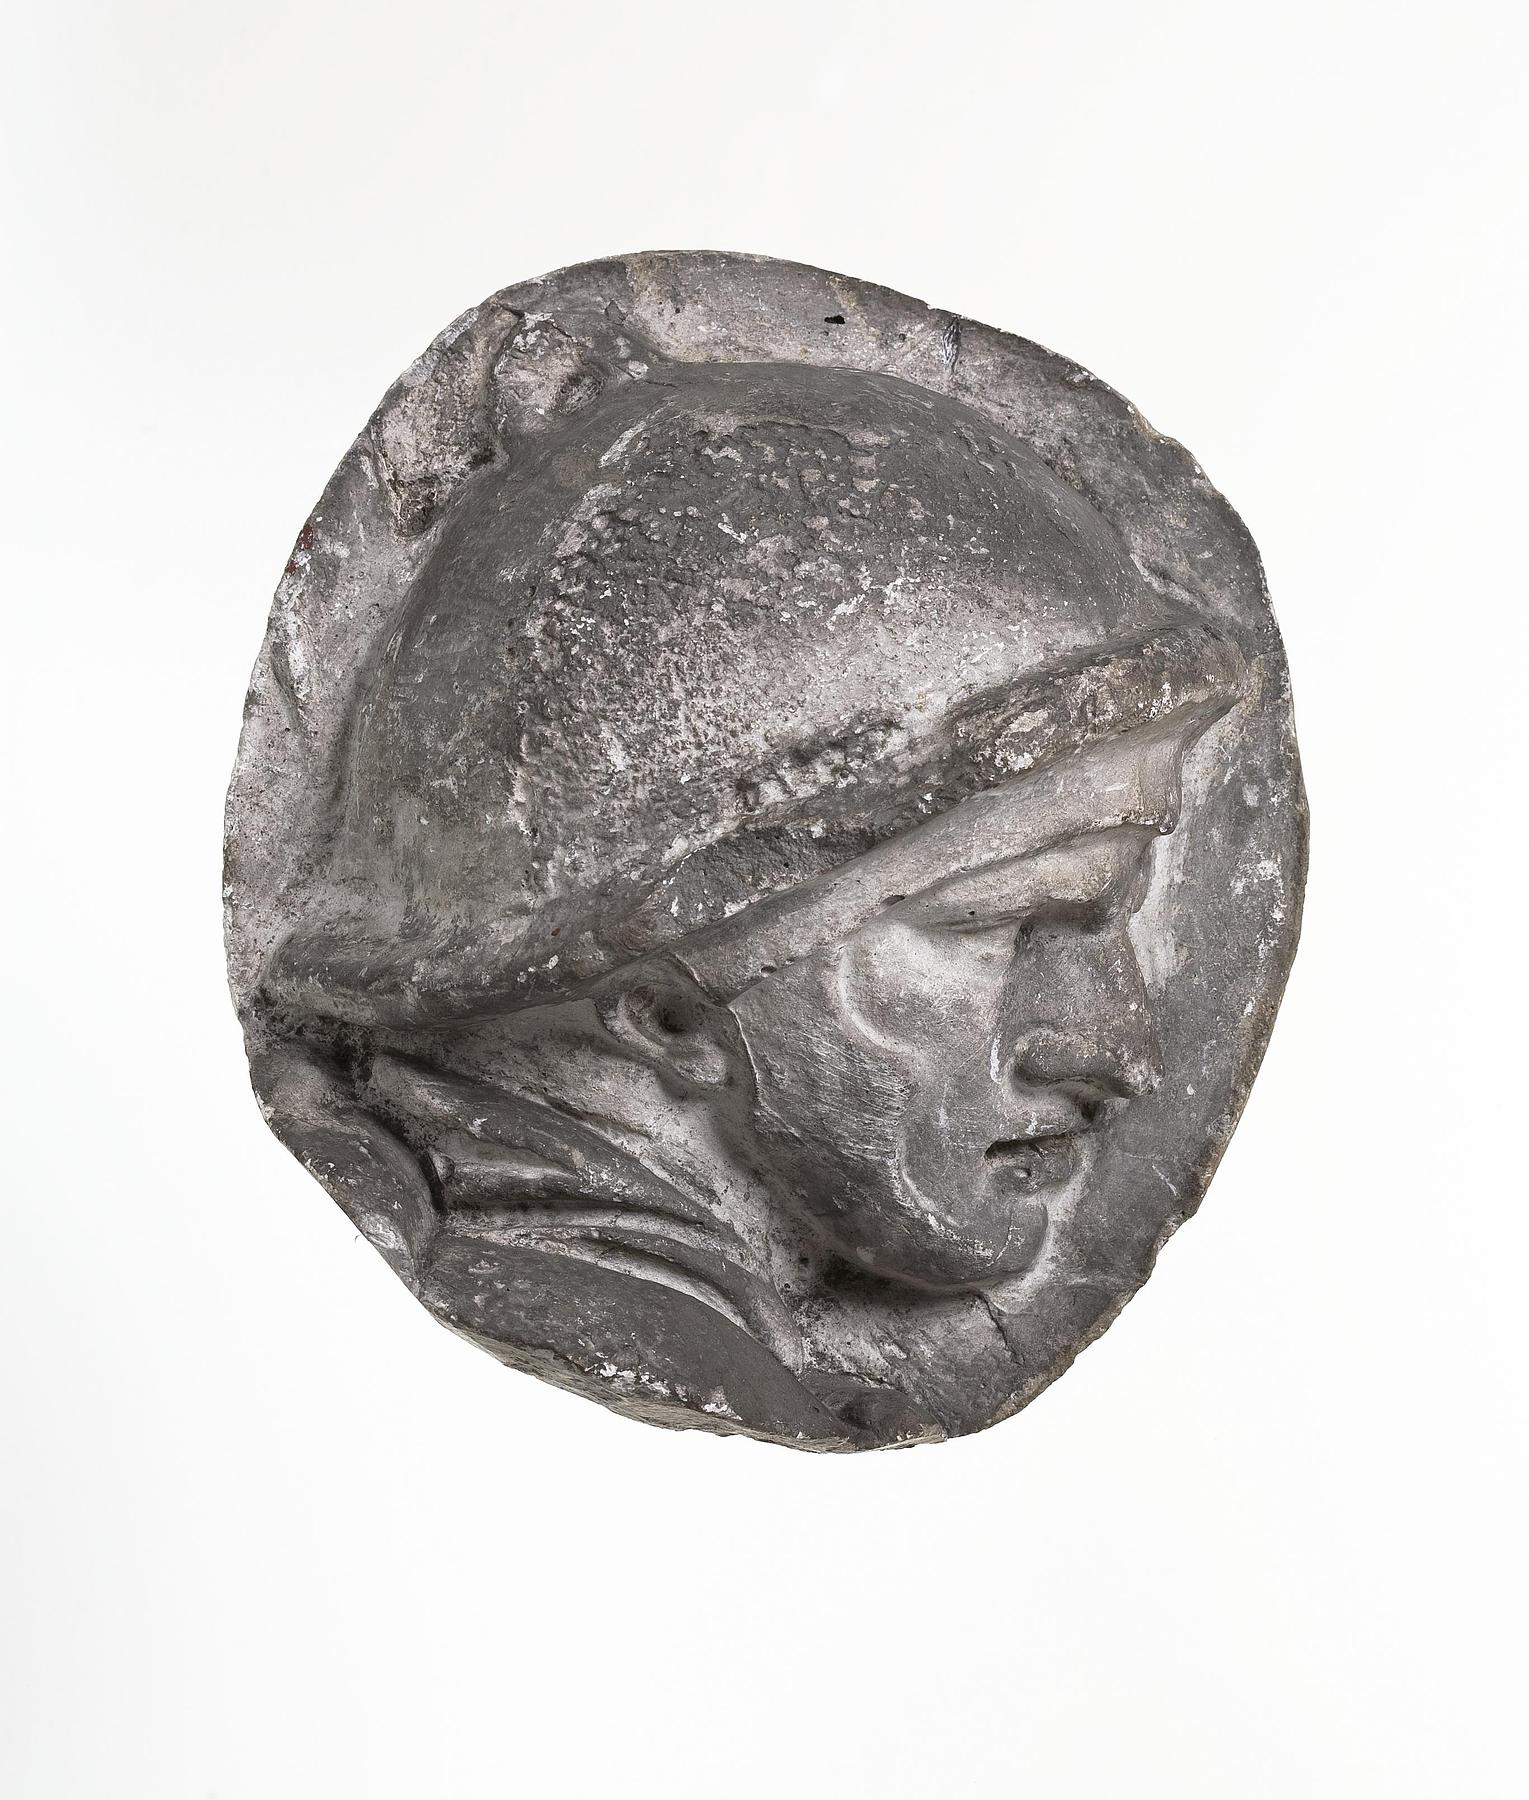 Head of a helmeted Roman auxiliary, L326f